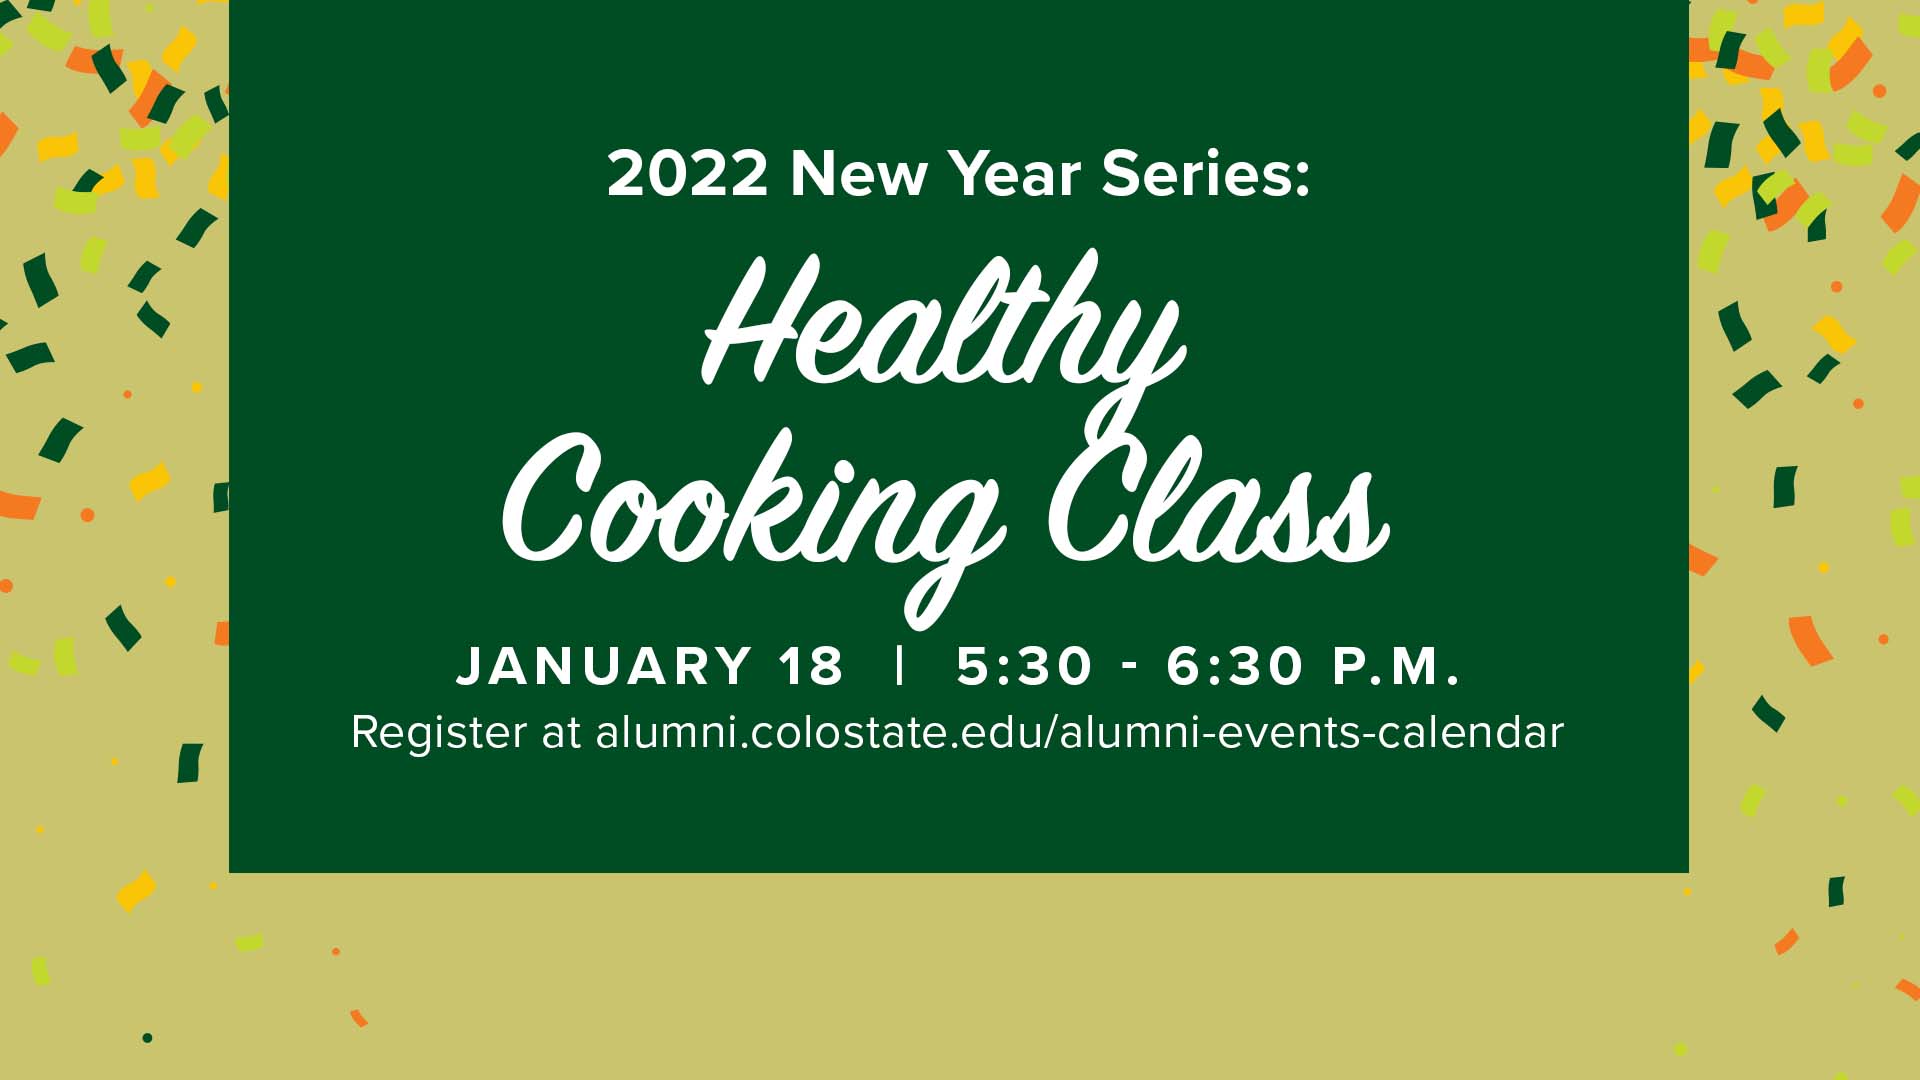 Image for New Year Series: Healthy Cooking Class webinar